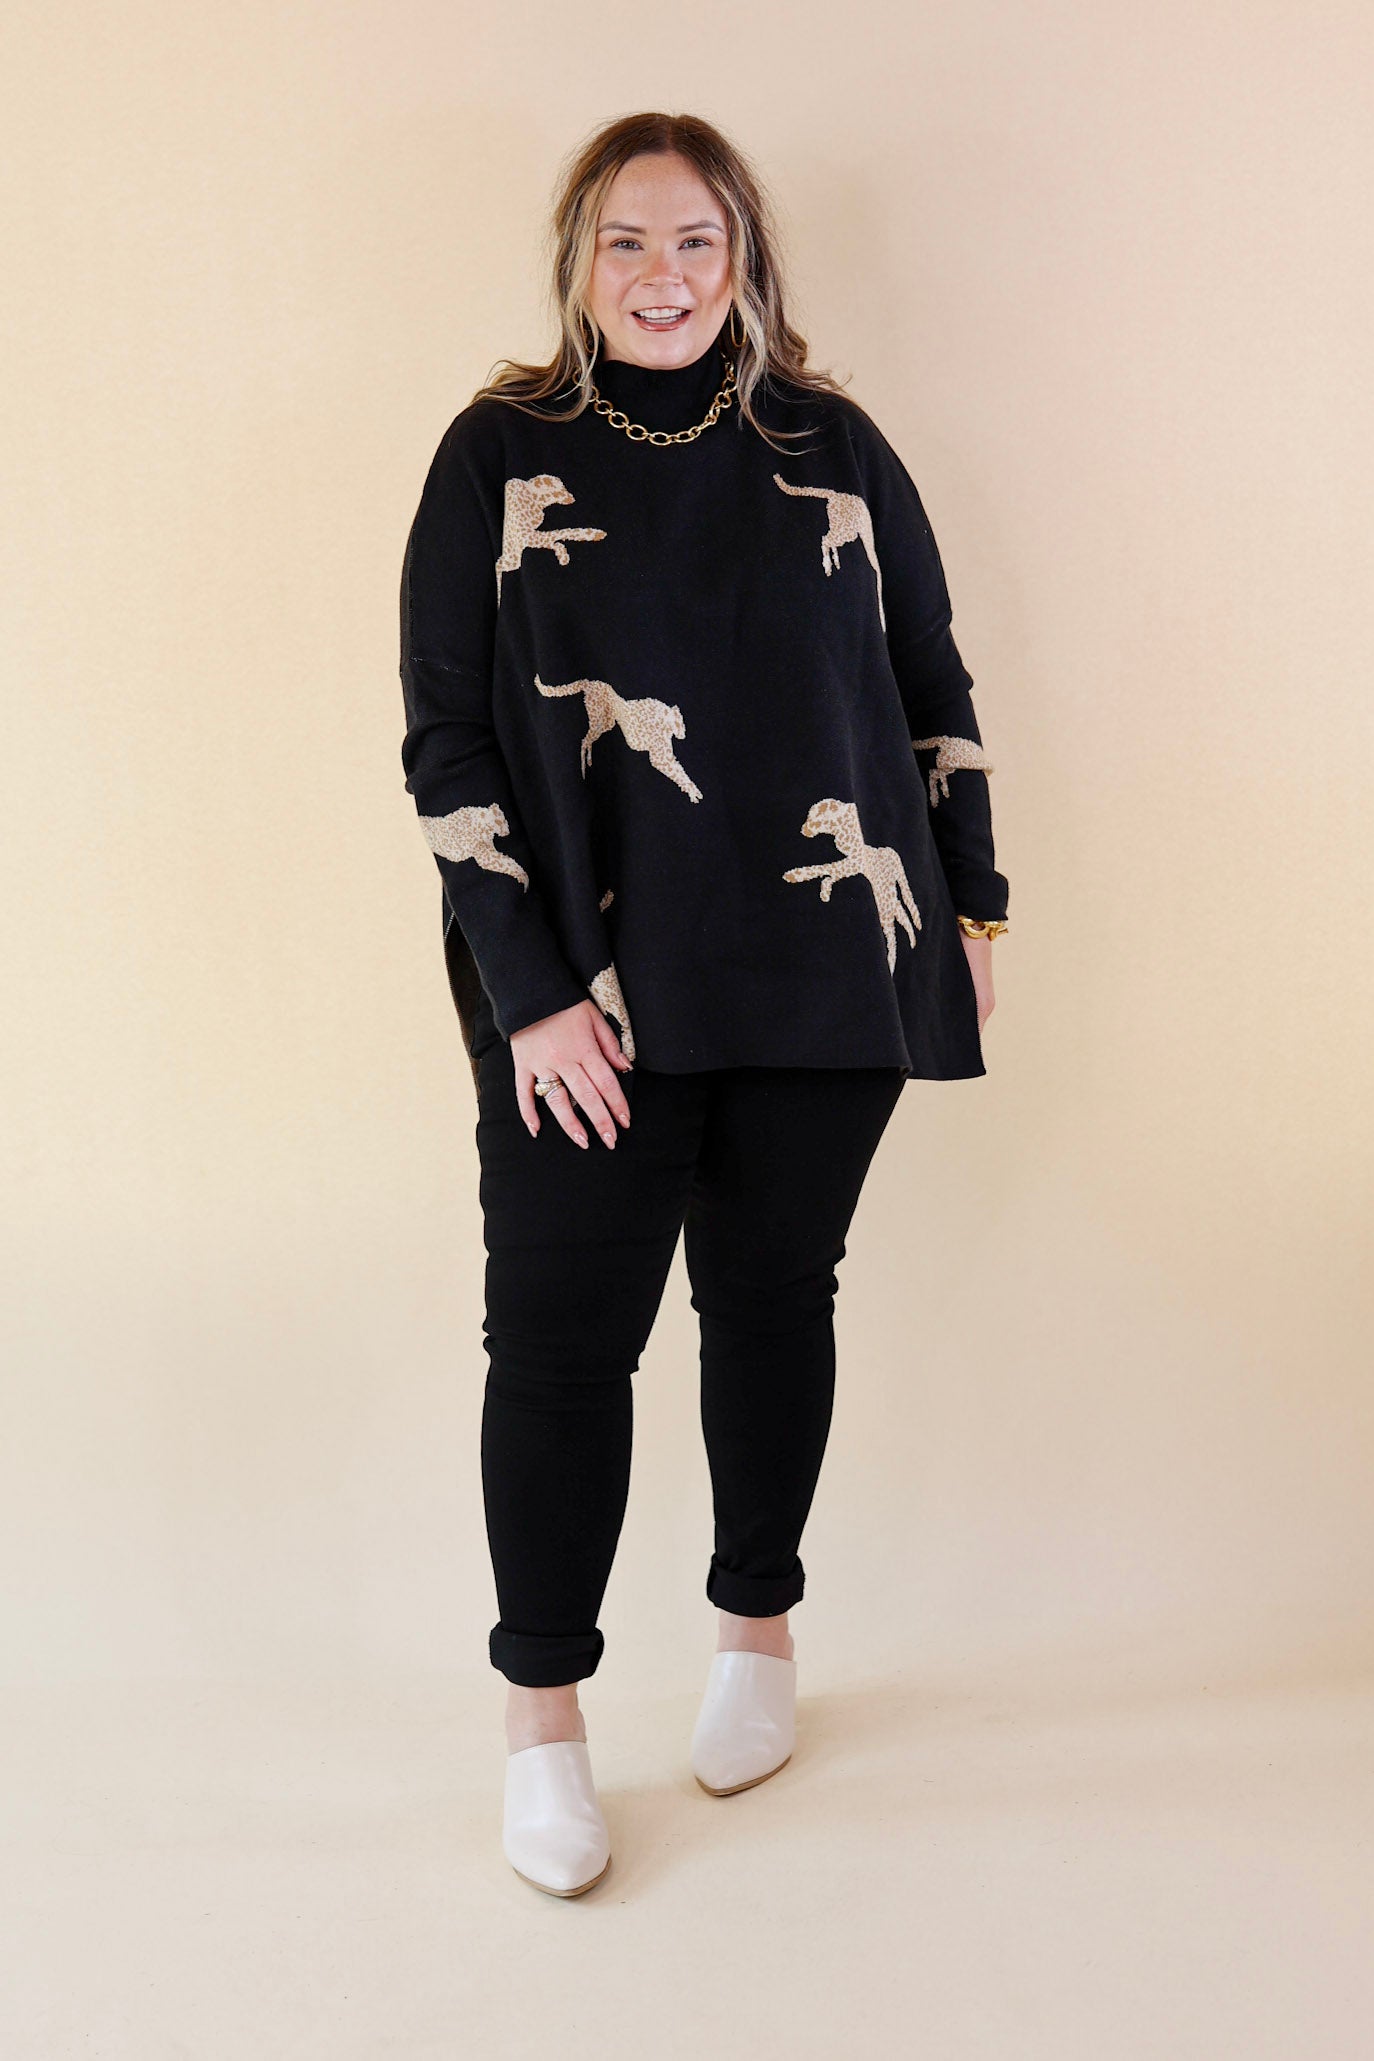 Cheetah Girls Mock Neck Cheetah Print Sweater in Black - Giddy Up Glamour Boutique